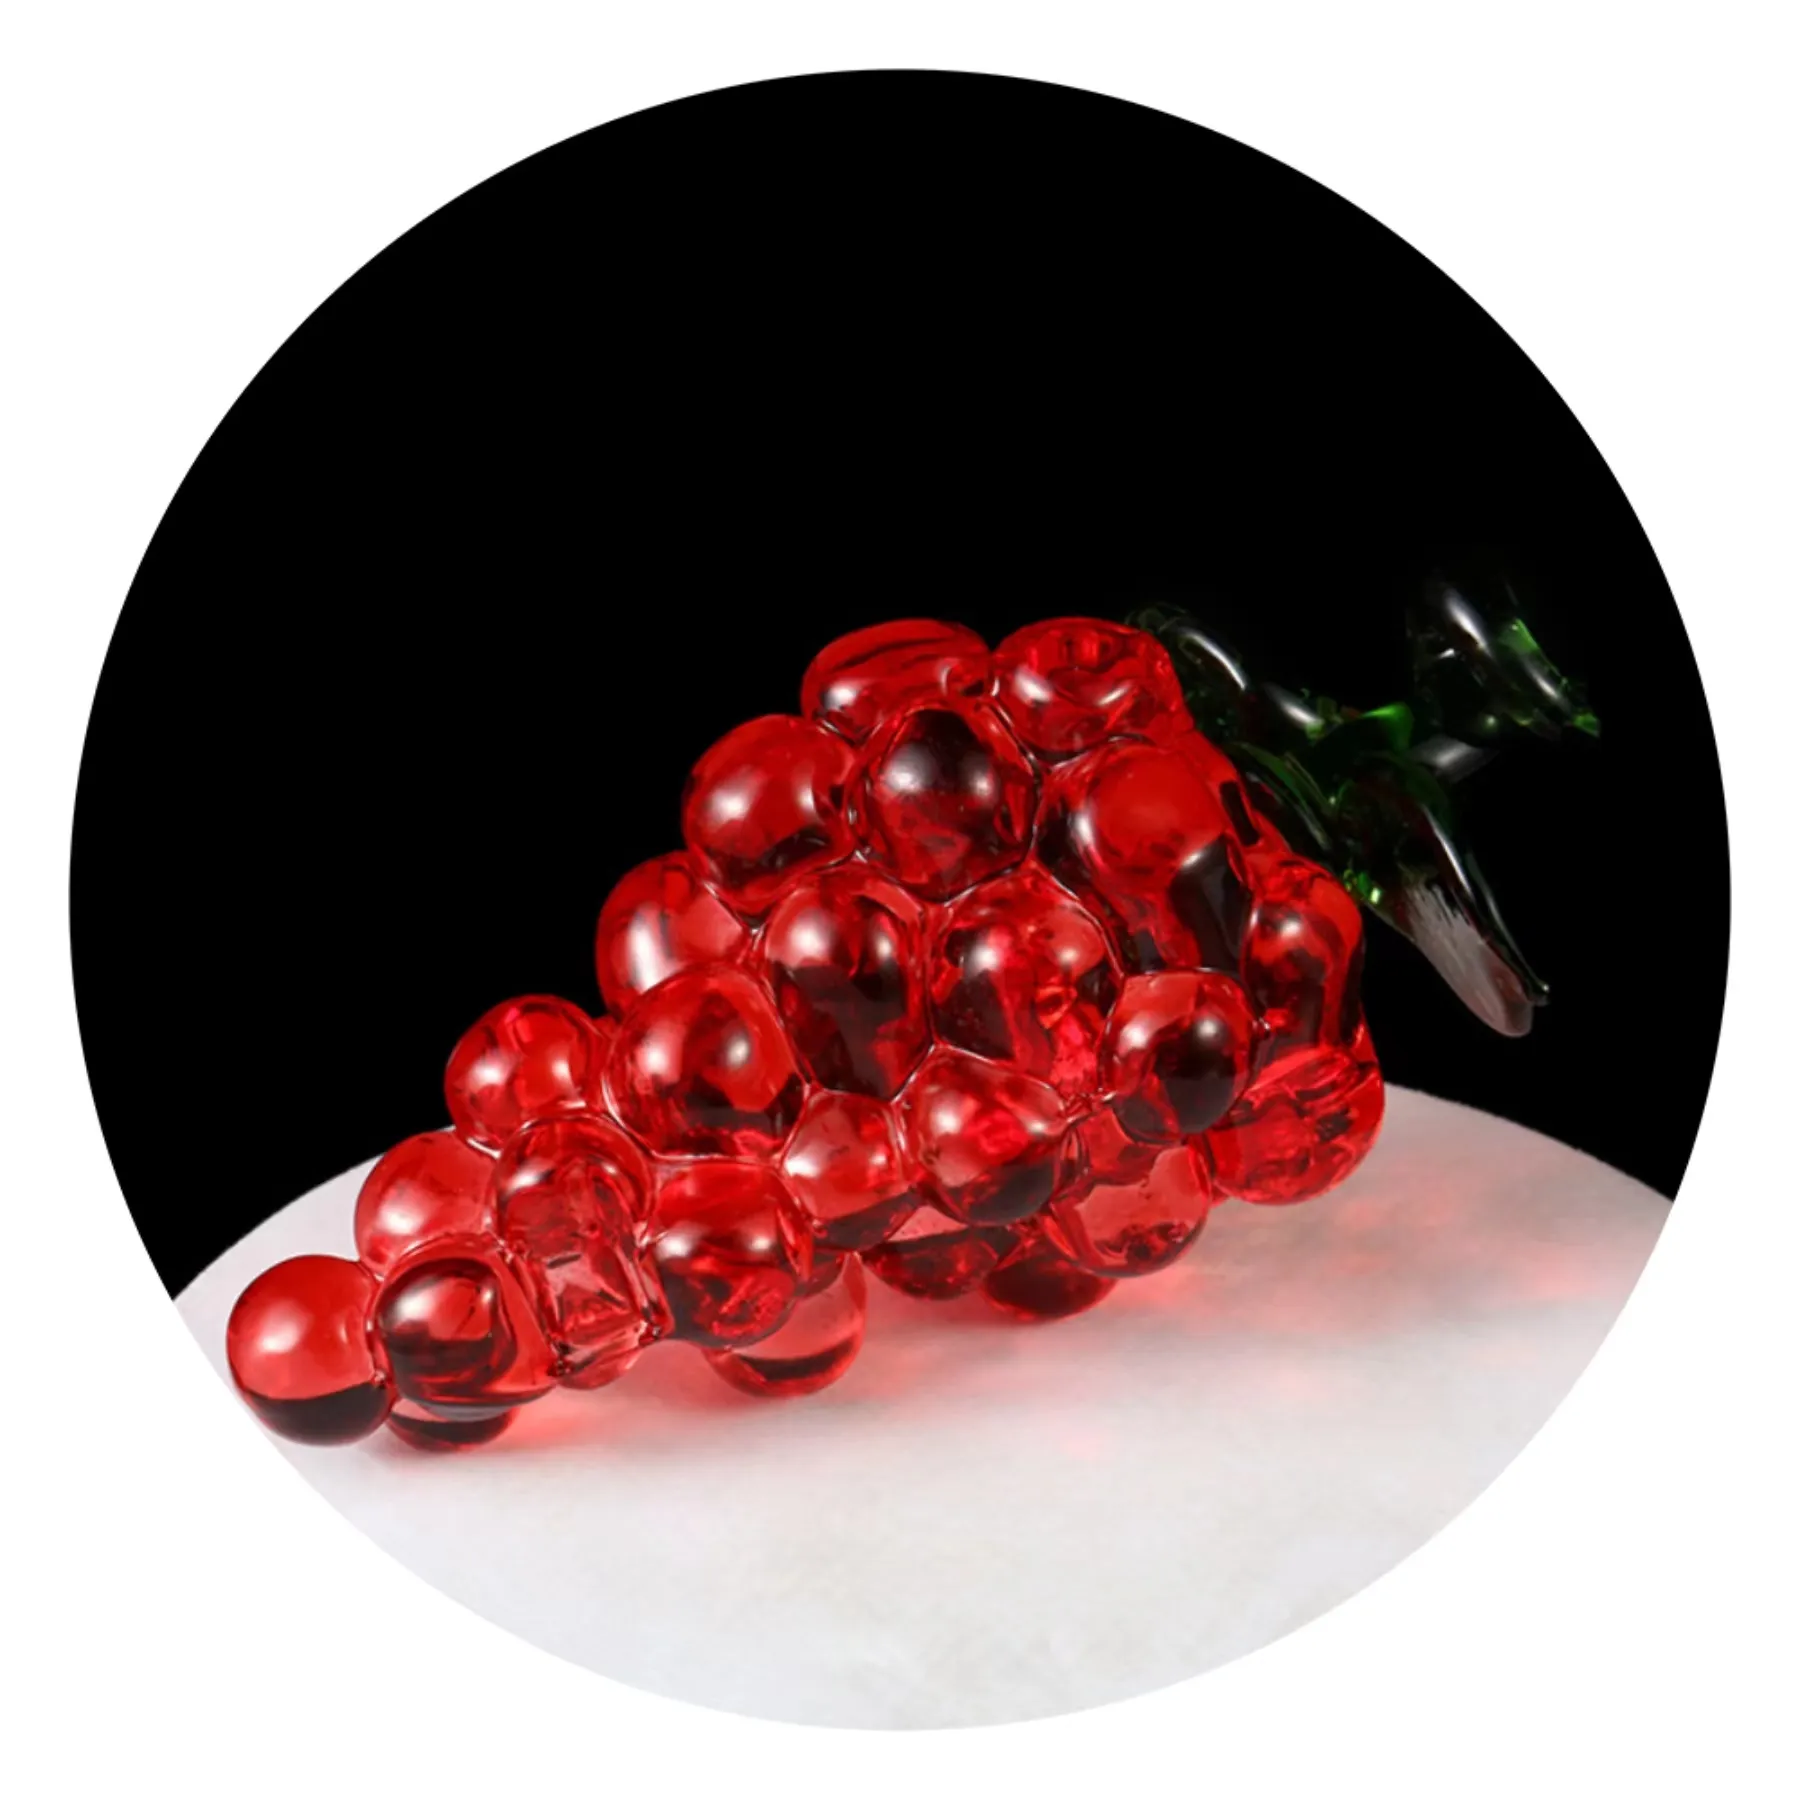 Crystal Green Pepper Red Pepper Living Room Decorative Crystal Ornaments Souvenir Home Wedding Decoration